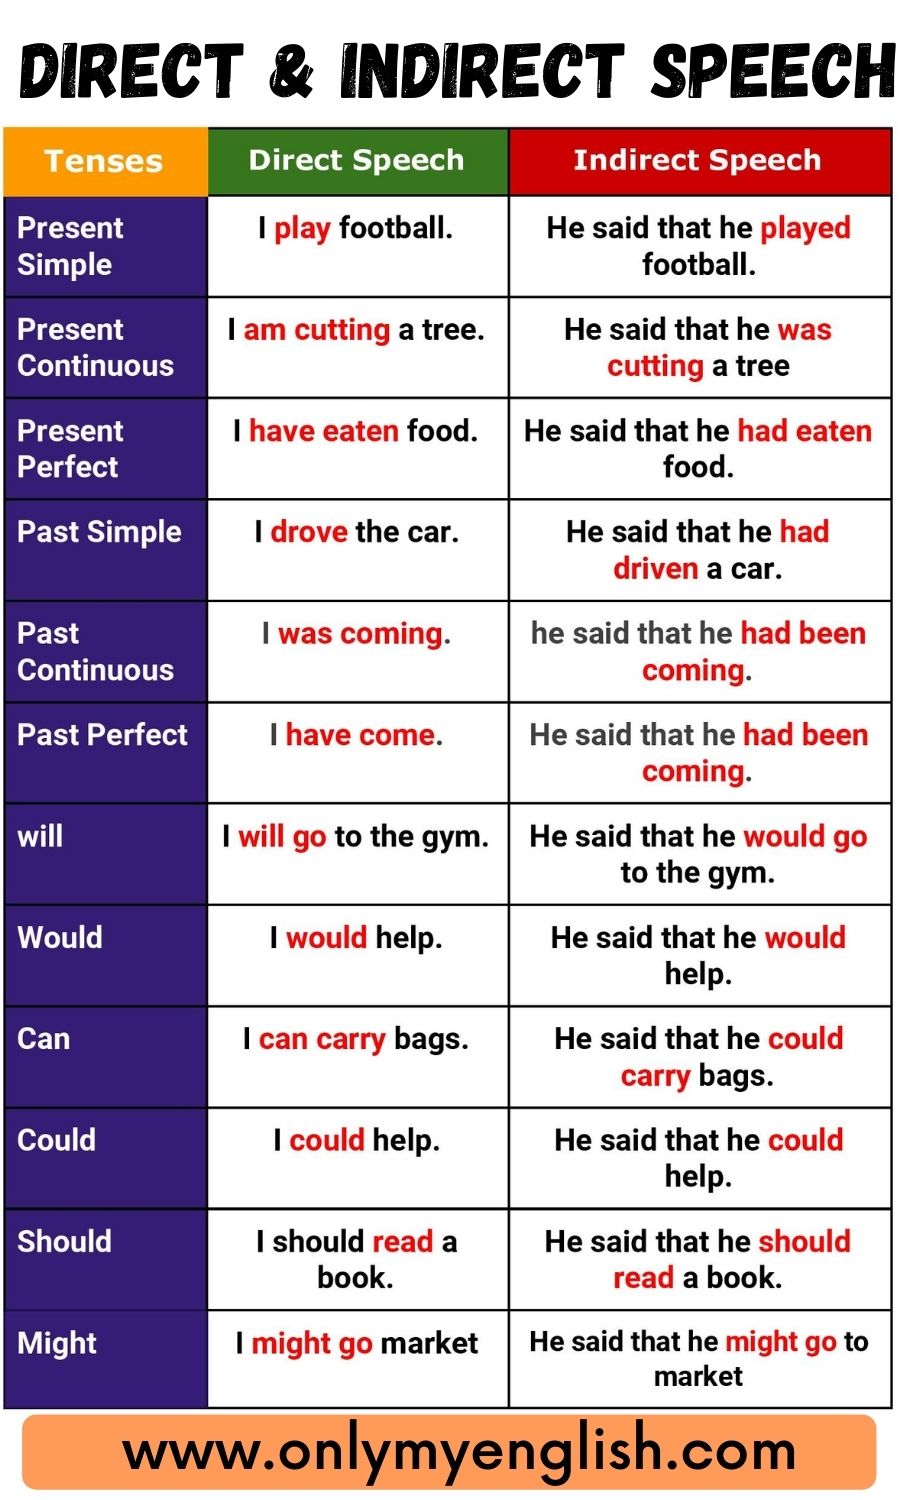 direct speech and indirect speech present continuous